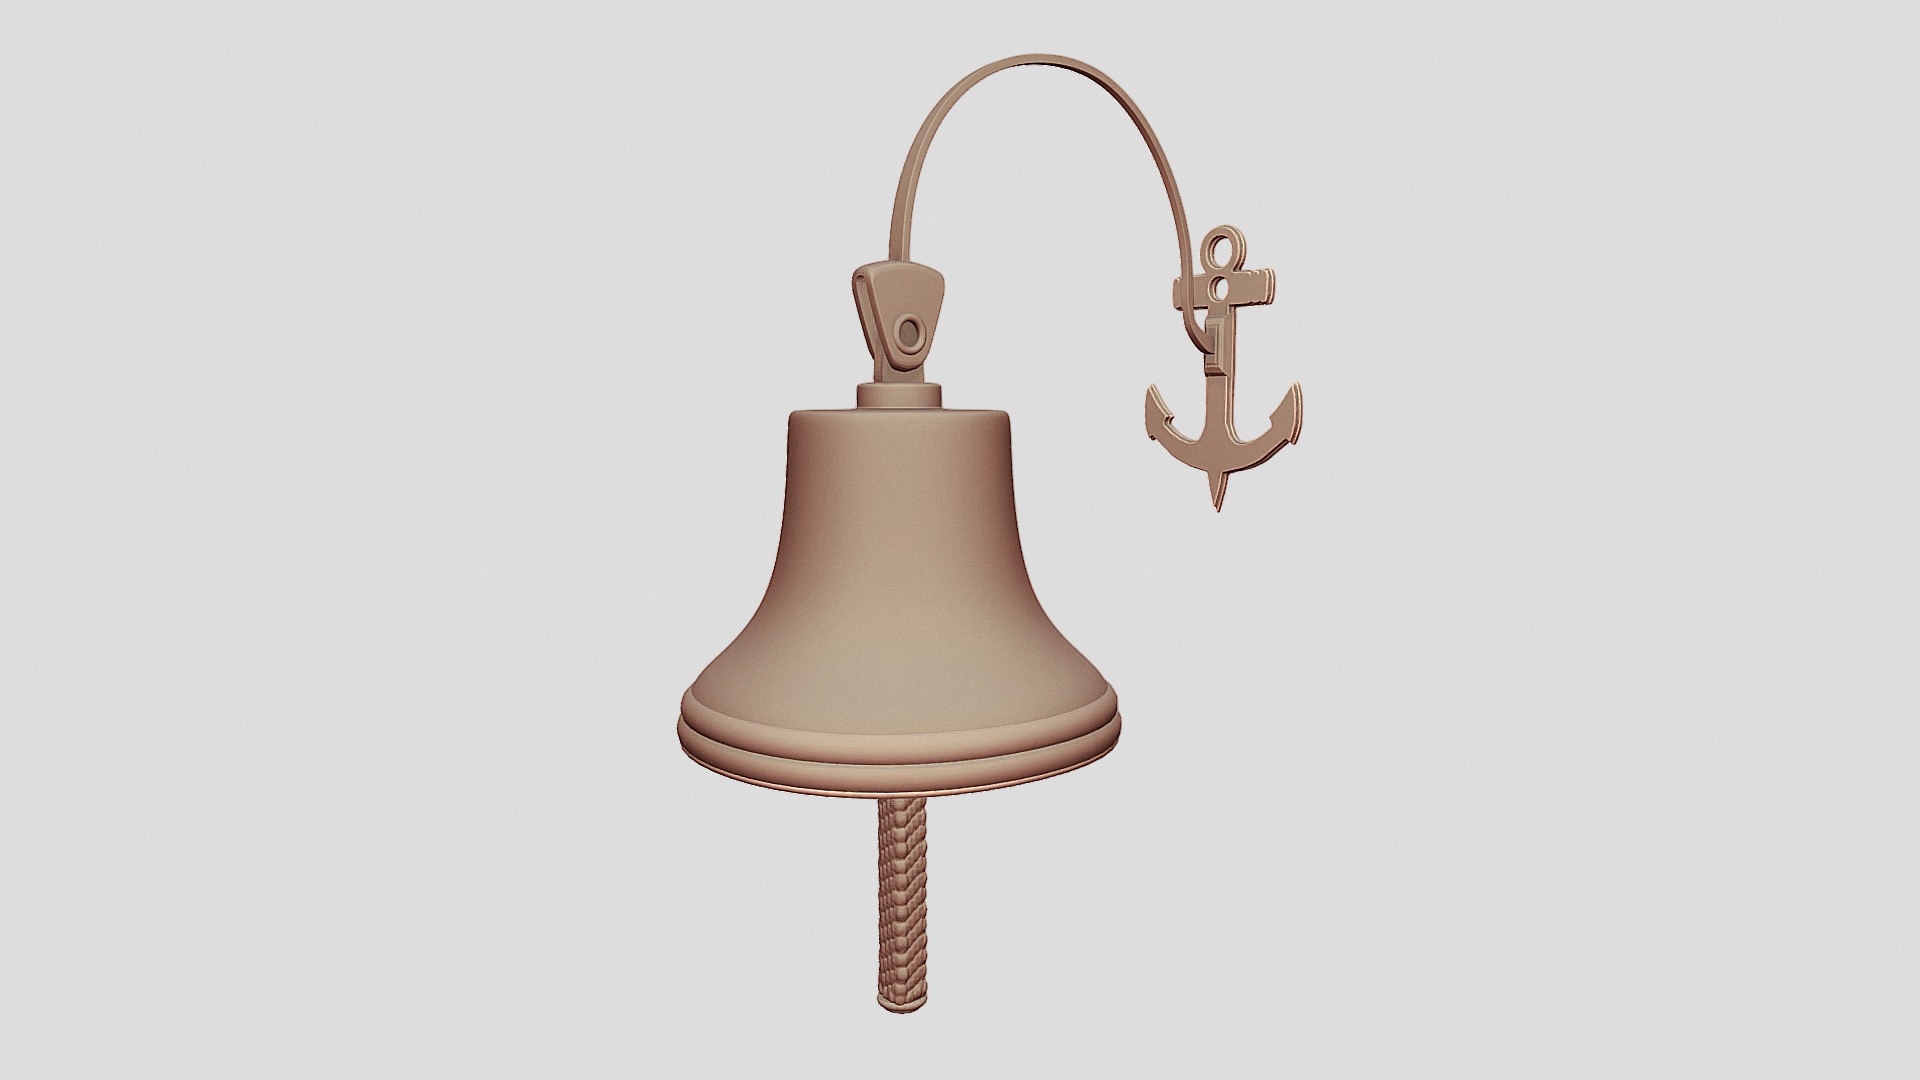 3D model Nautical Ship Bell – Clean Version - This is a 3D model of the Nautical Ship Bell - Clean Version. The 3D model is about a gold and brown lamp.